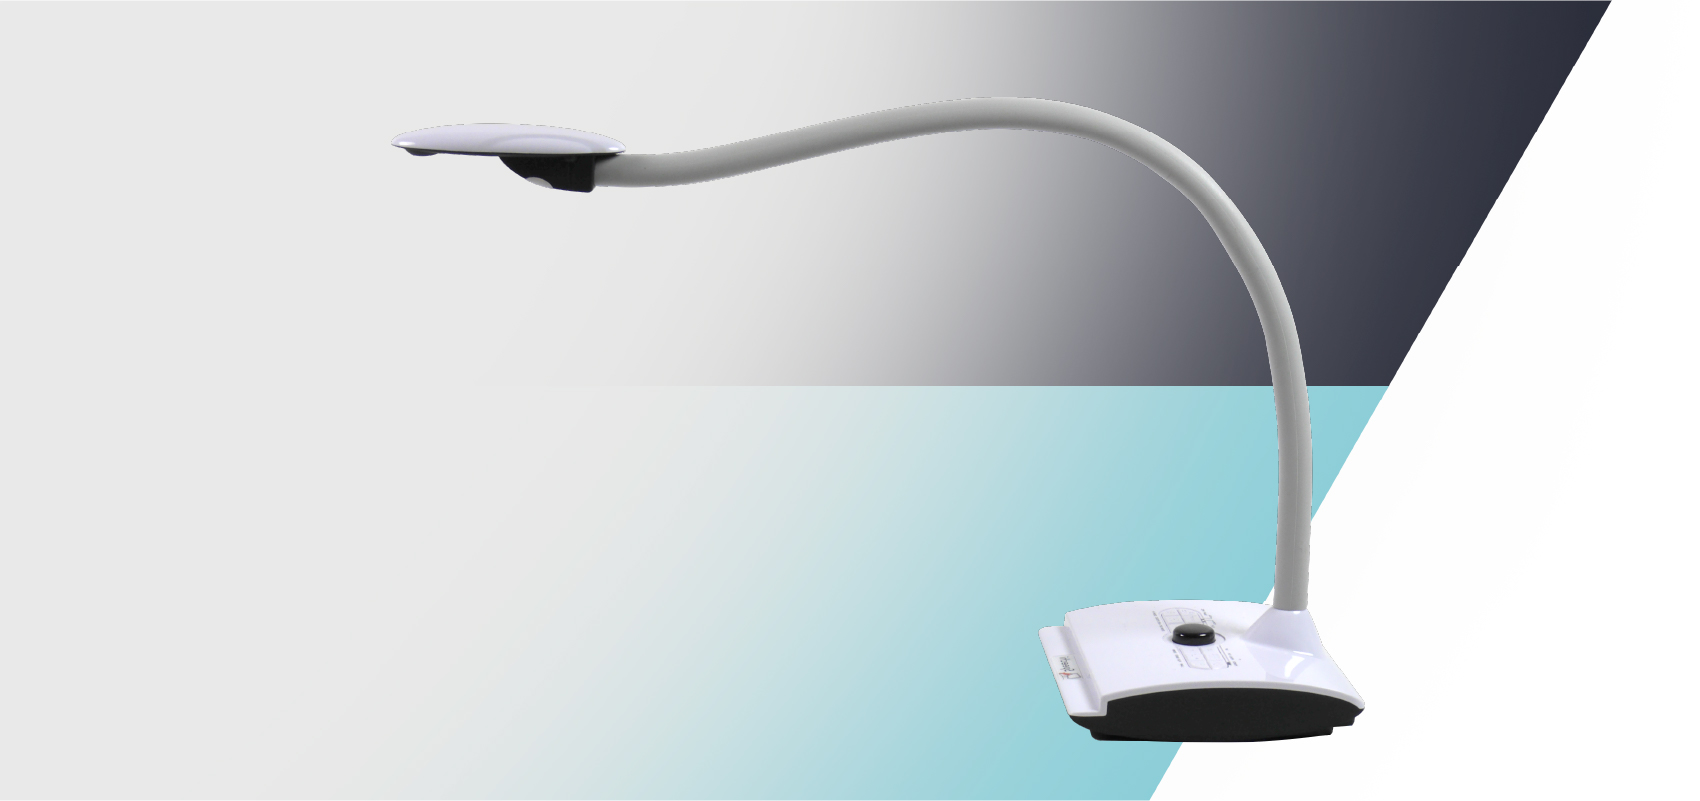 The flexible, powerful document camera for your classroom or meeting room